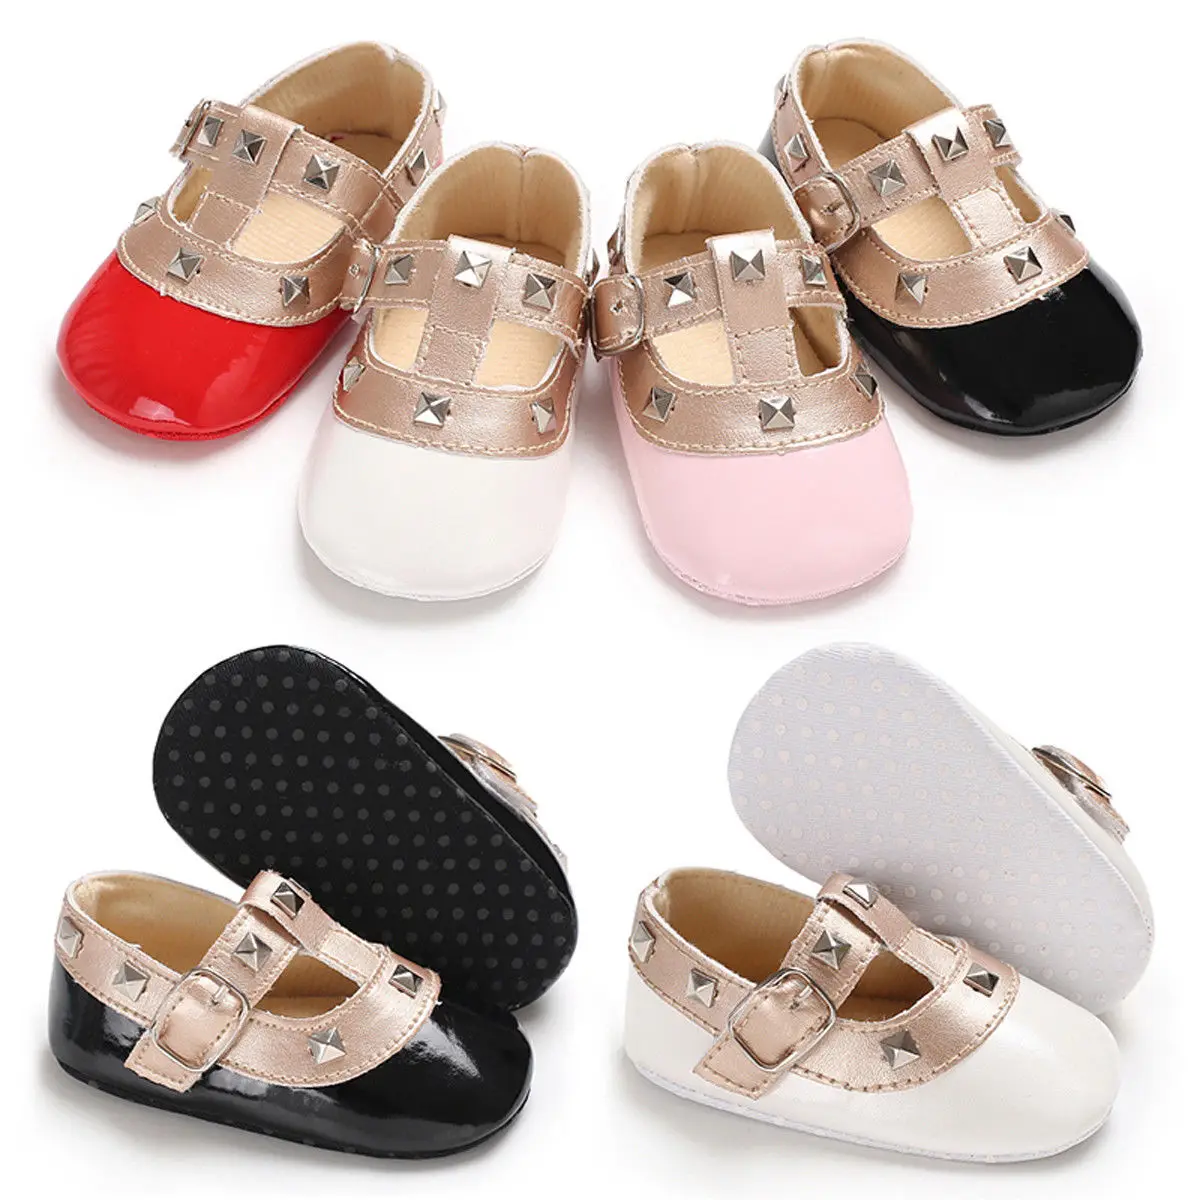 Newborn Baby Girls Bow Princess Shoes Soft Sole Crib Leather Solid Buckle Strap Flat with Heel Baby Shoes Toddler Fashion Shoes